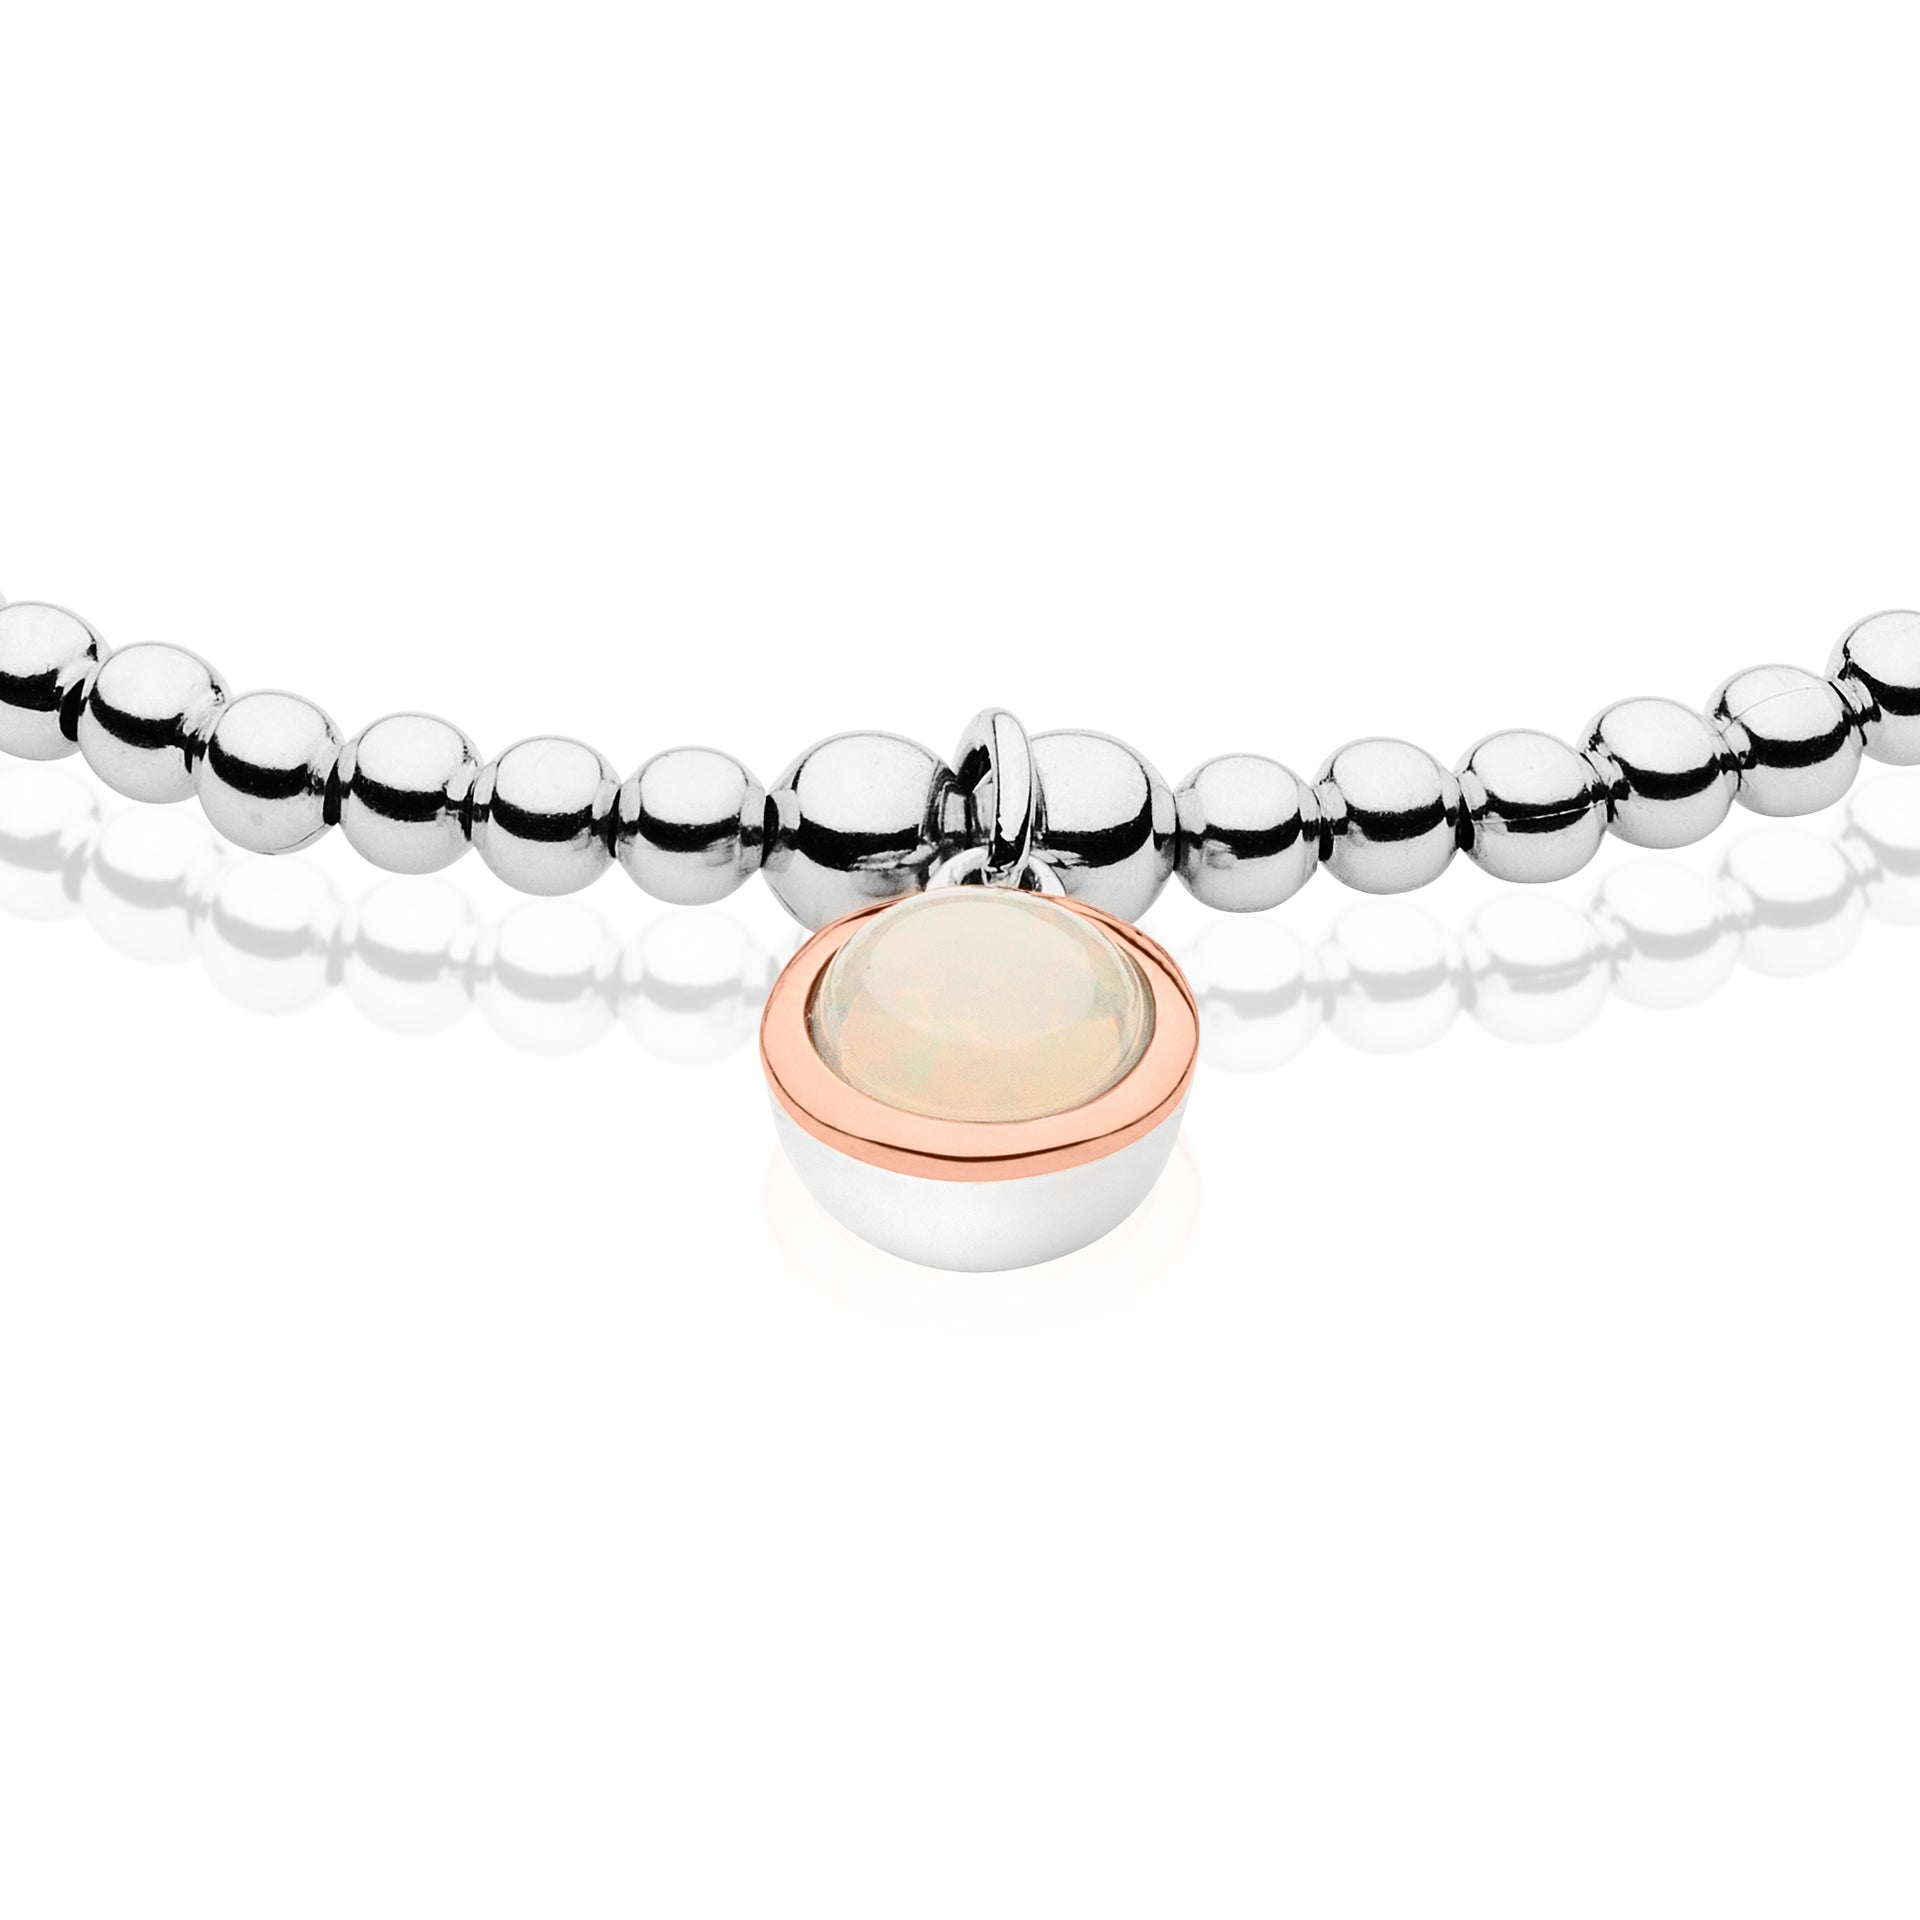 Birthstone Silver and Fire Opal Affinity Bracelet – October